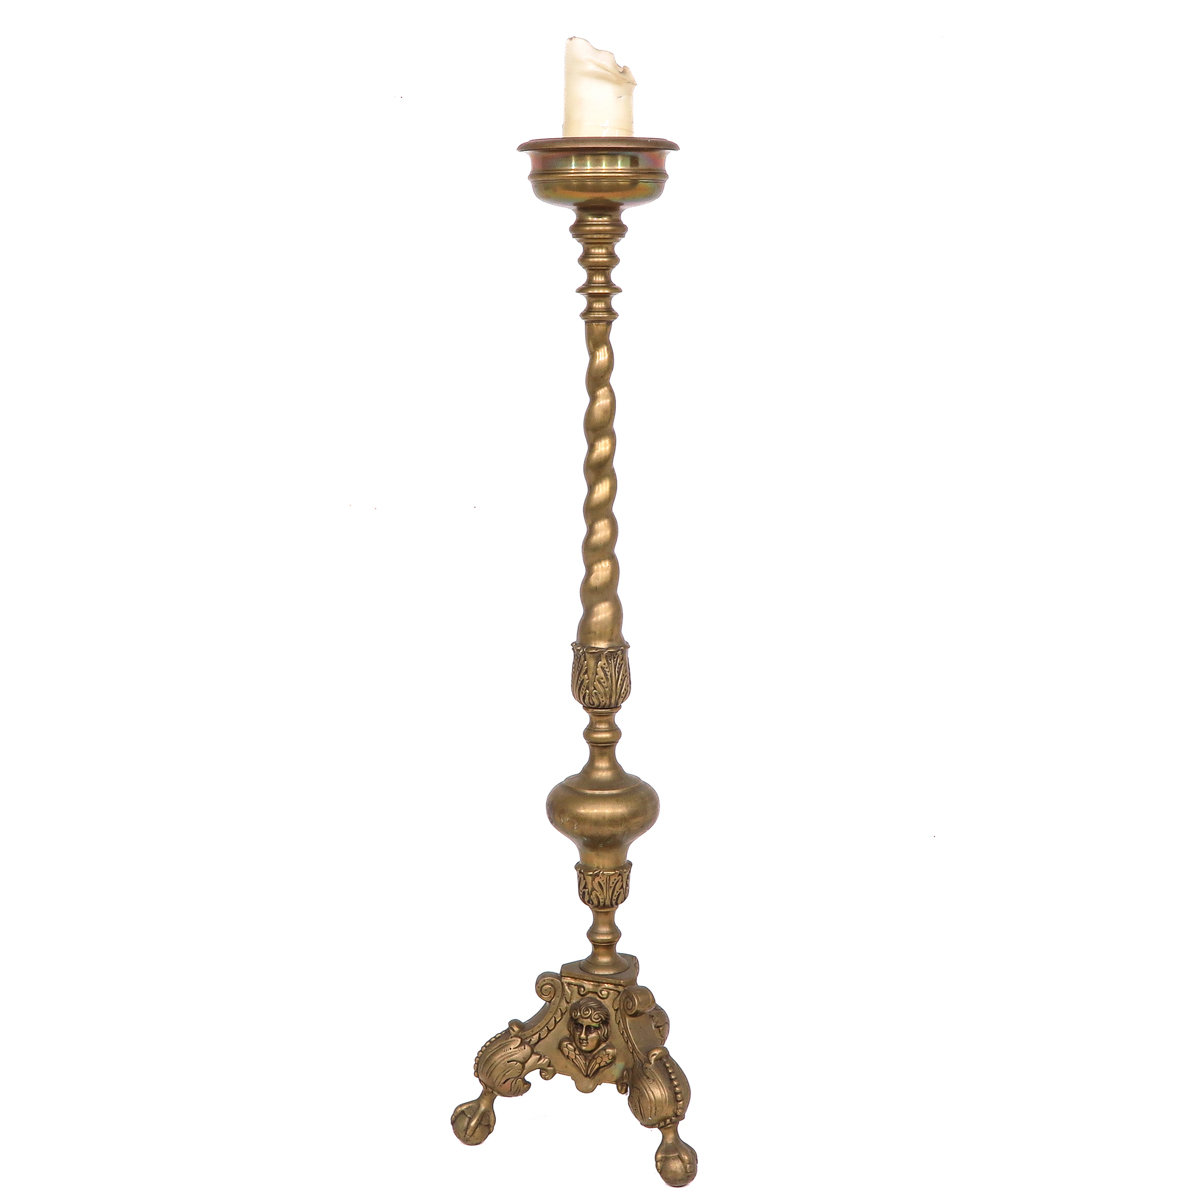 A Bronze Altar Candlestick - Image 2 of 9